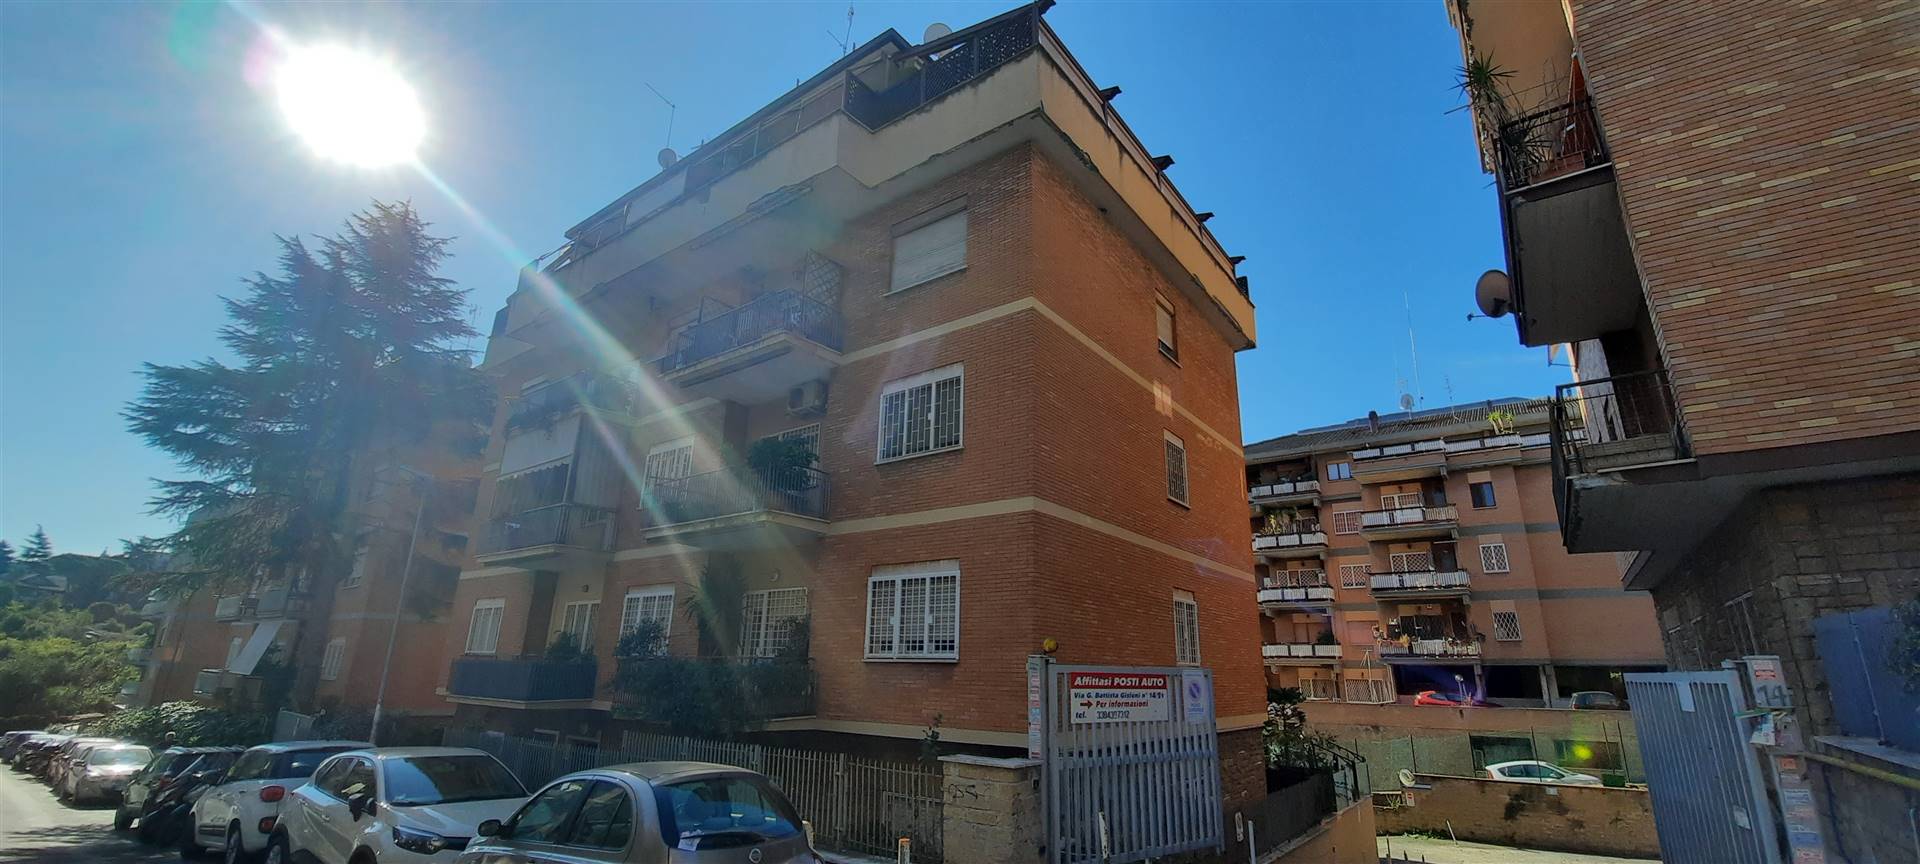 BRAVETTA, ROMA, Apartment for sale of 110 Sq. mt., Excellent Condition, Heating Individual heating system, Energetic class: G, Epi: 175 kwh/m2 year, 